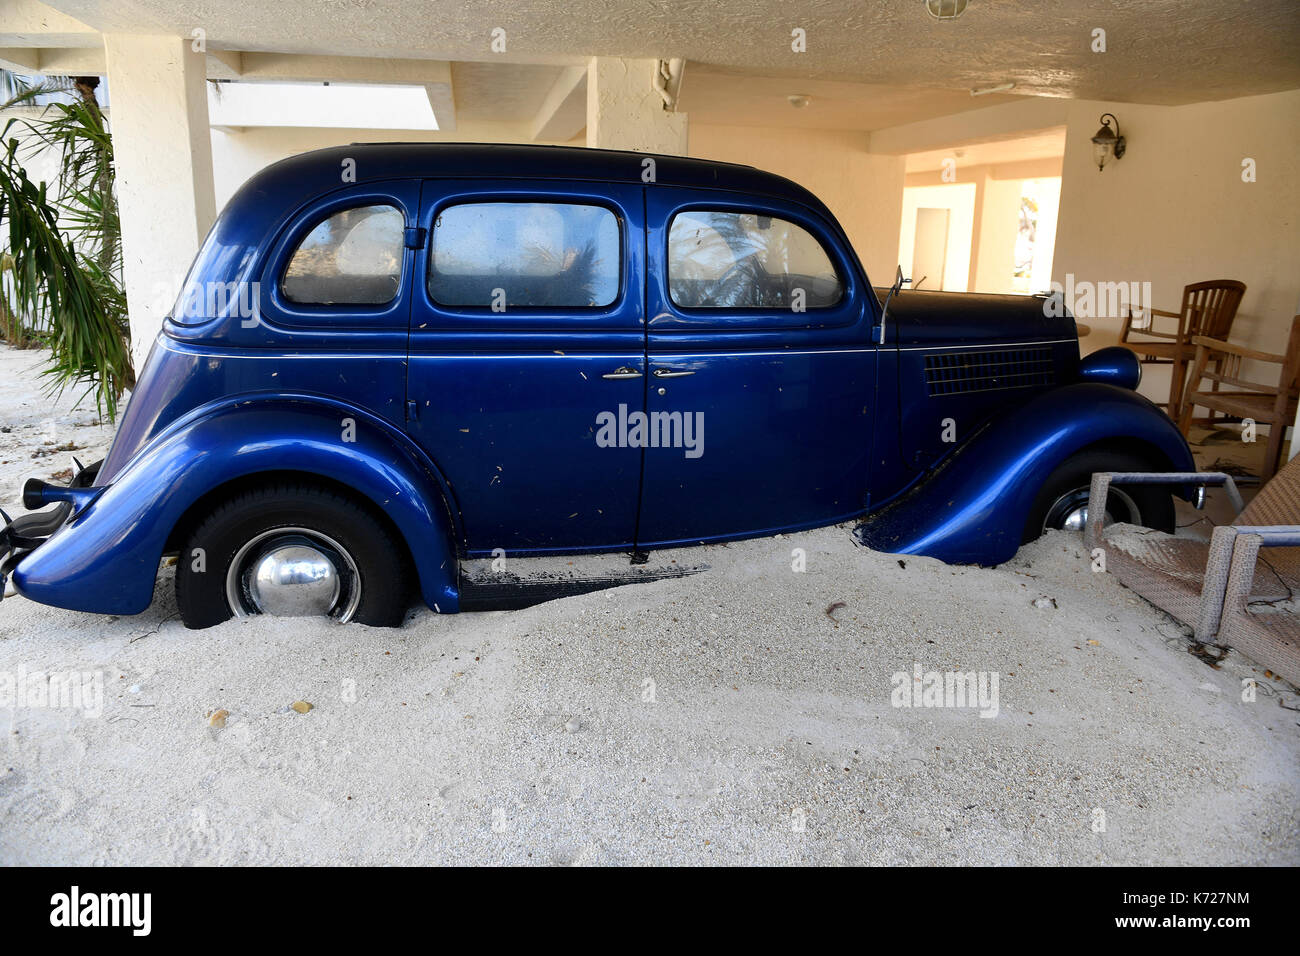 September 14, 2017 - Tavernier, Florida, U.S.- The home of former Dolphins and University of Miami football coach Jimmy Johnson was destroyed by Hurricane Irma. Several feet of sand was pushed onto his property and into his home destroying collectibles, this antique car and severly damaging the whole property. Credit: Taimy Alvarez/Sun-Sentinel/ZUMA Wire/Alamy Live News Stock Photo